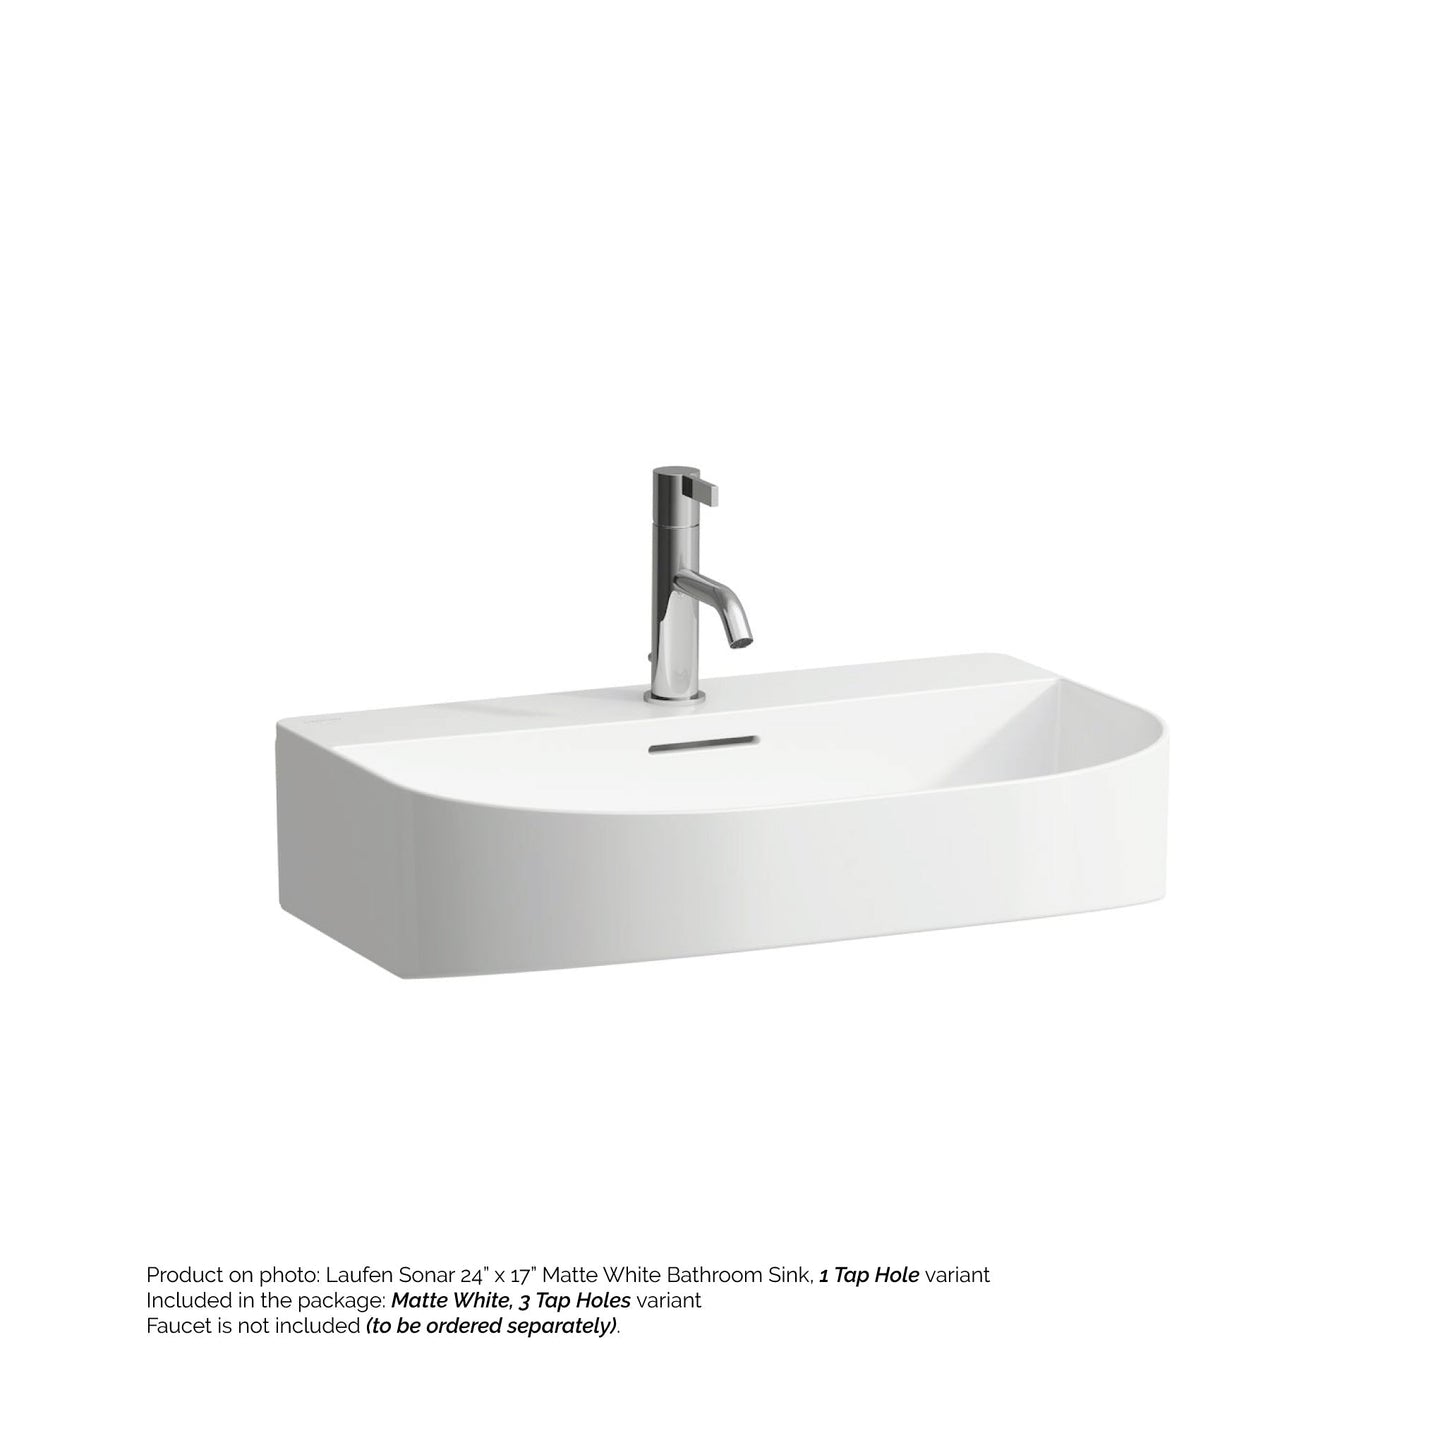 Laufen Sonar 24" Matte White Ceramic Wall-Mounted Bathroom Sink With 3 Faucet Holes